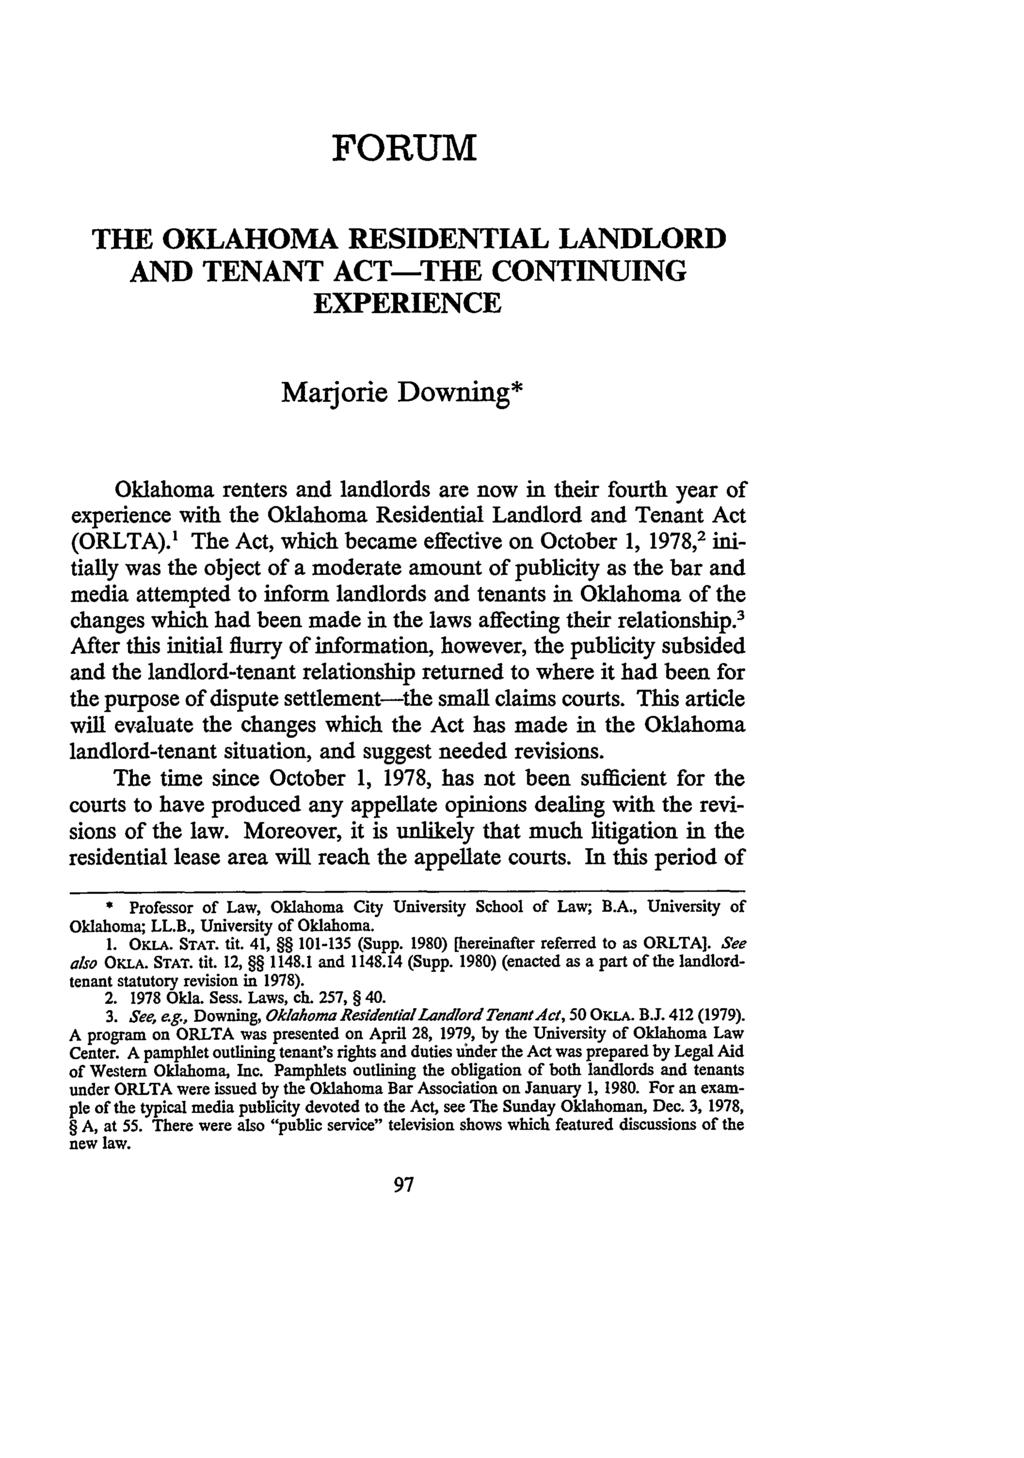 Downing: The Oklahoma Residential Landlord and Tenant Act--The Continuing FORUM THE OKLAHOMA RESIDENTIAL LANDLORD AND TENANT ACT-THE CONTINUING EXPERIENCE Marjorie Downing* Oklahoma renters and